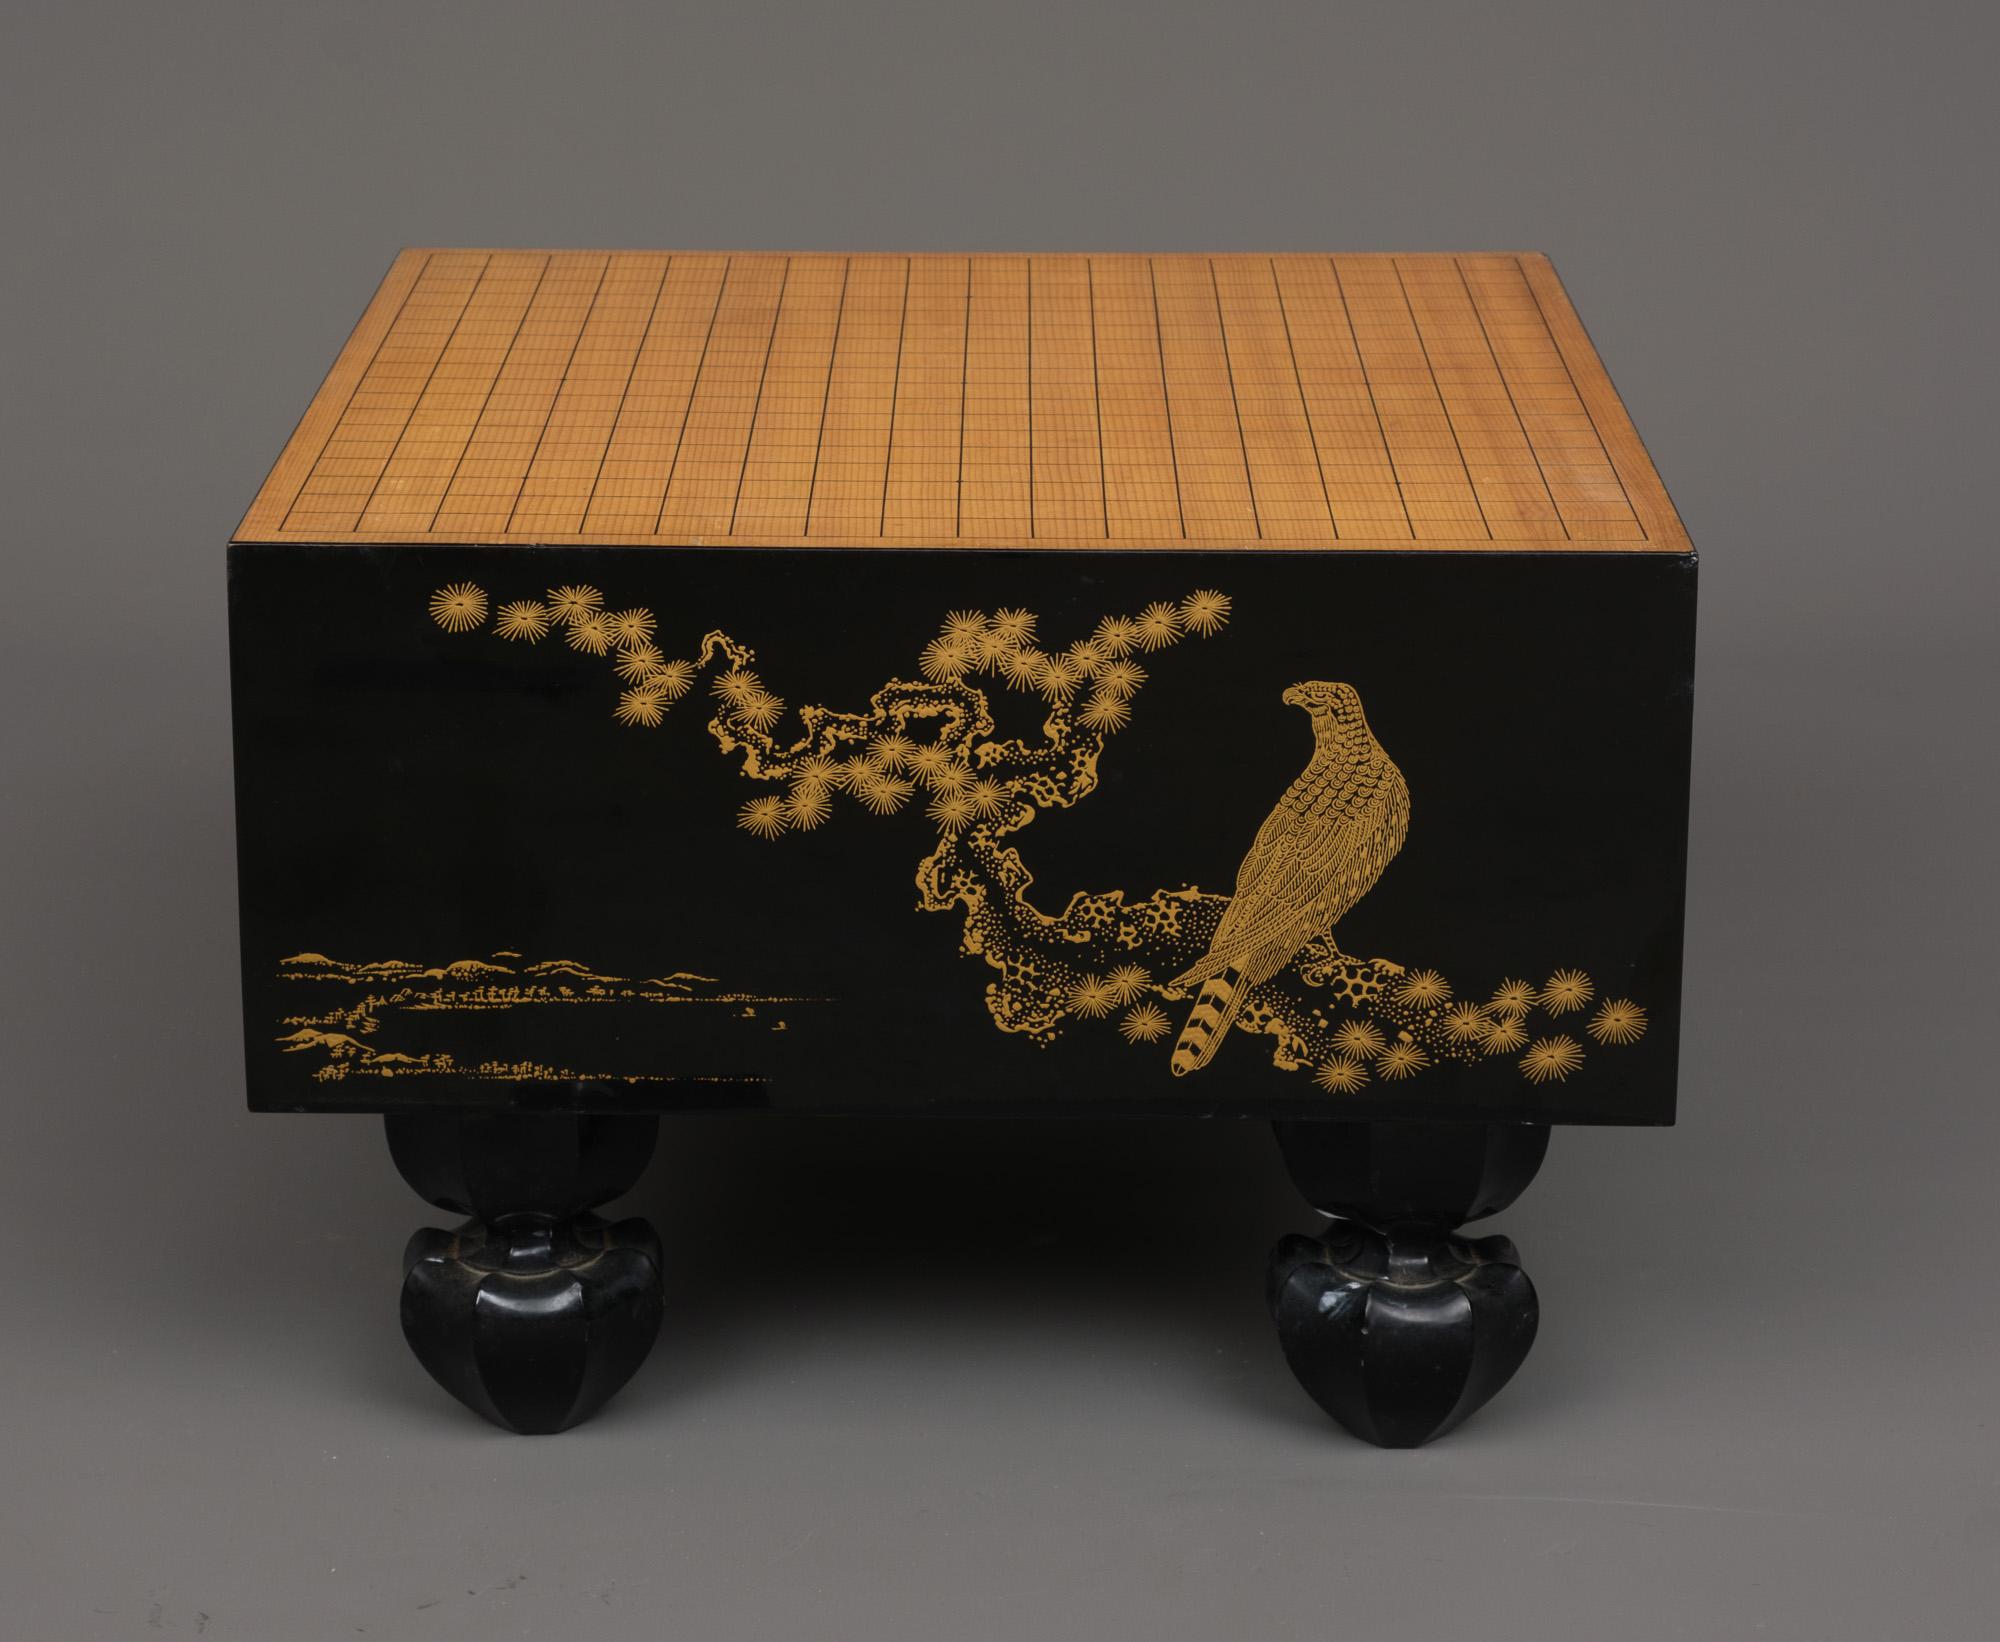 Japanese lacquer solid wooden go-game table 碁盤 (goban) complete with go-stones 2